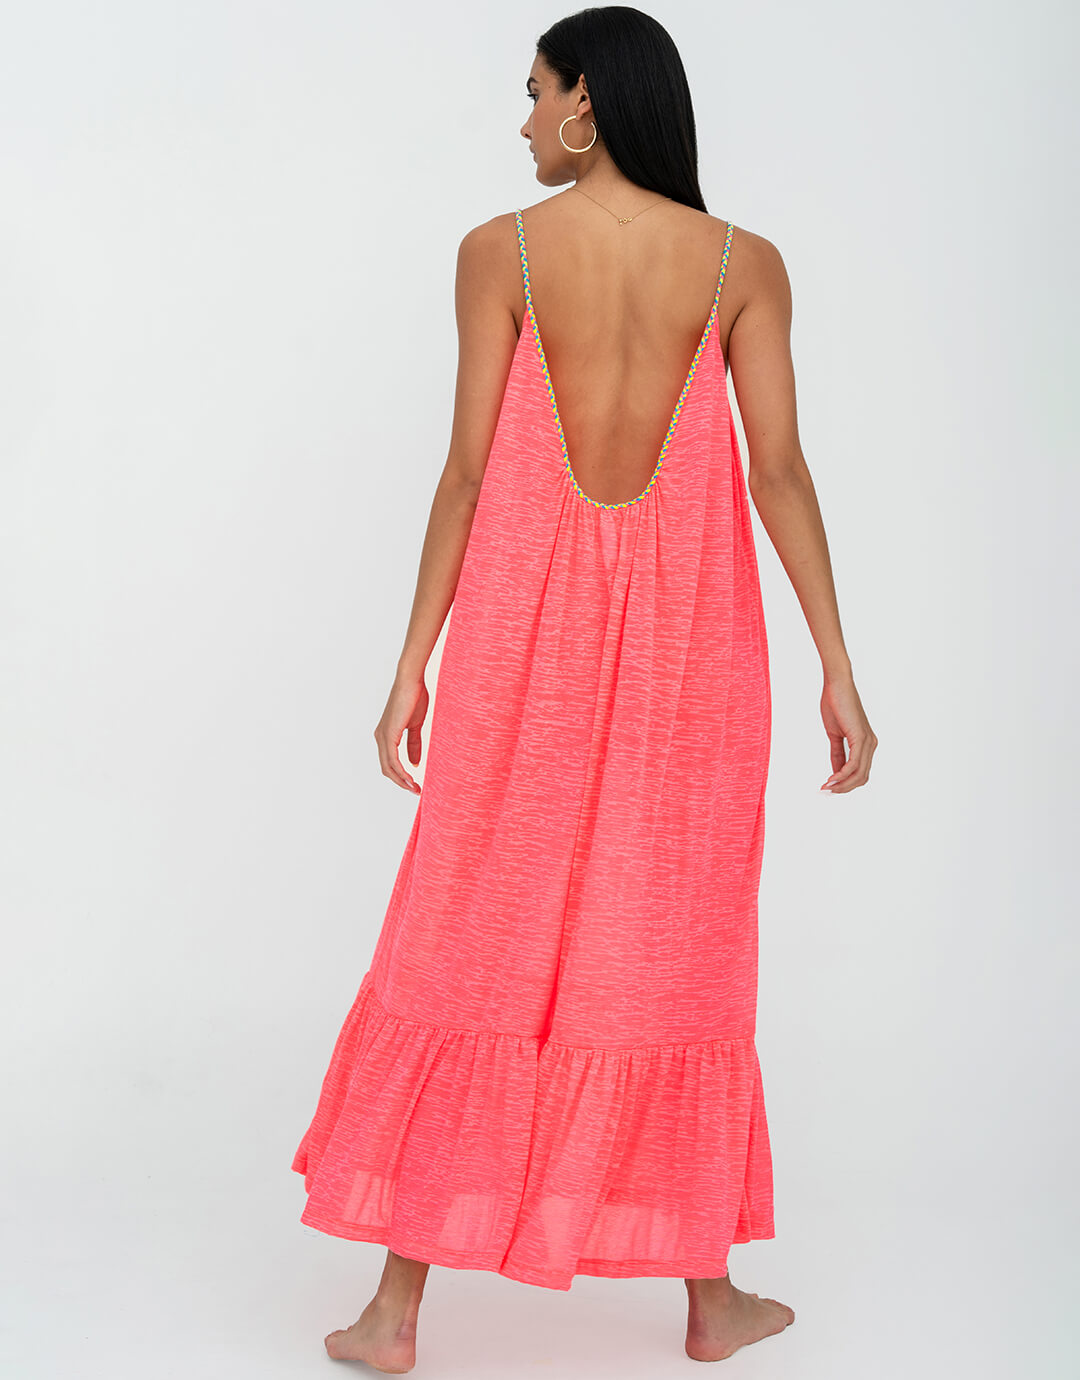 Braided Low Back Dress - Hot Pink - Simply Beach UK